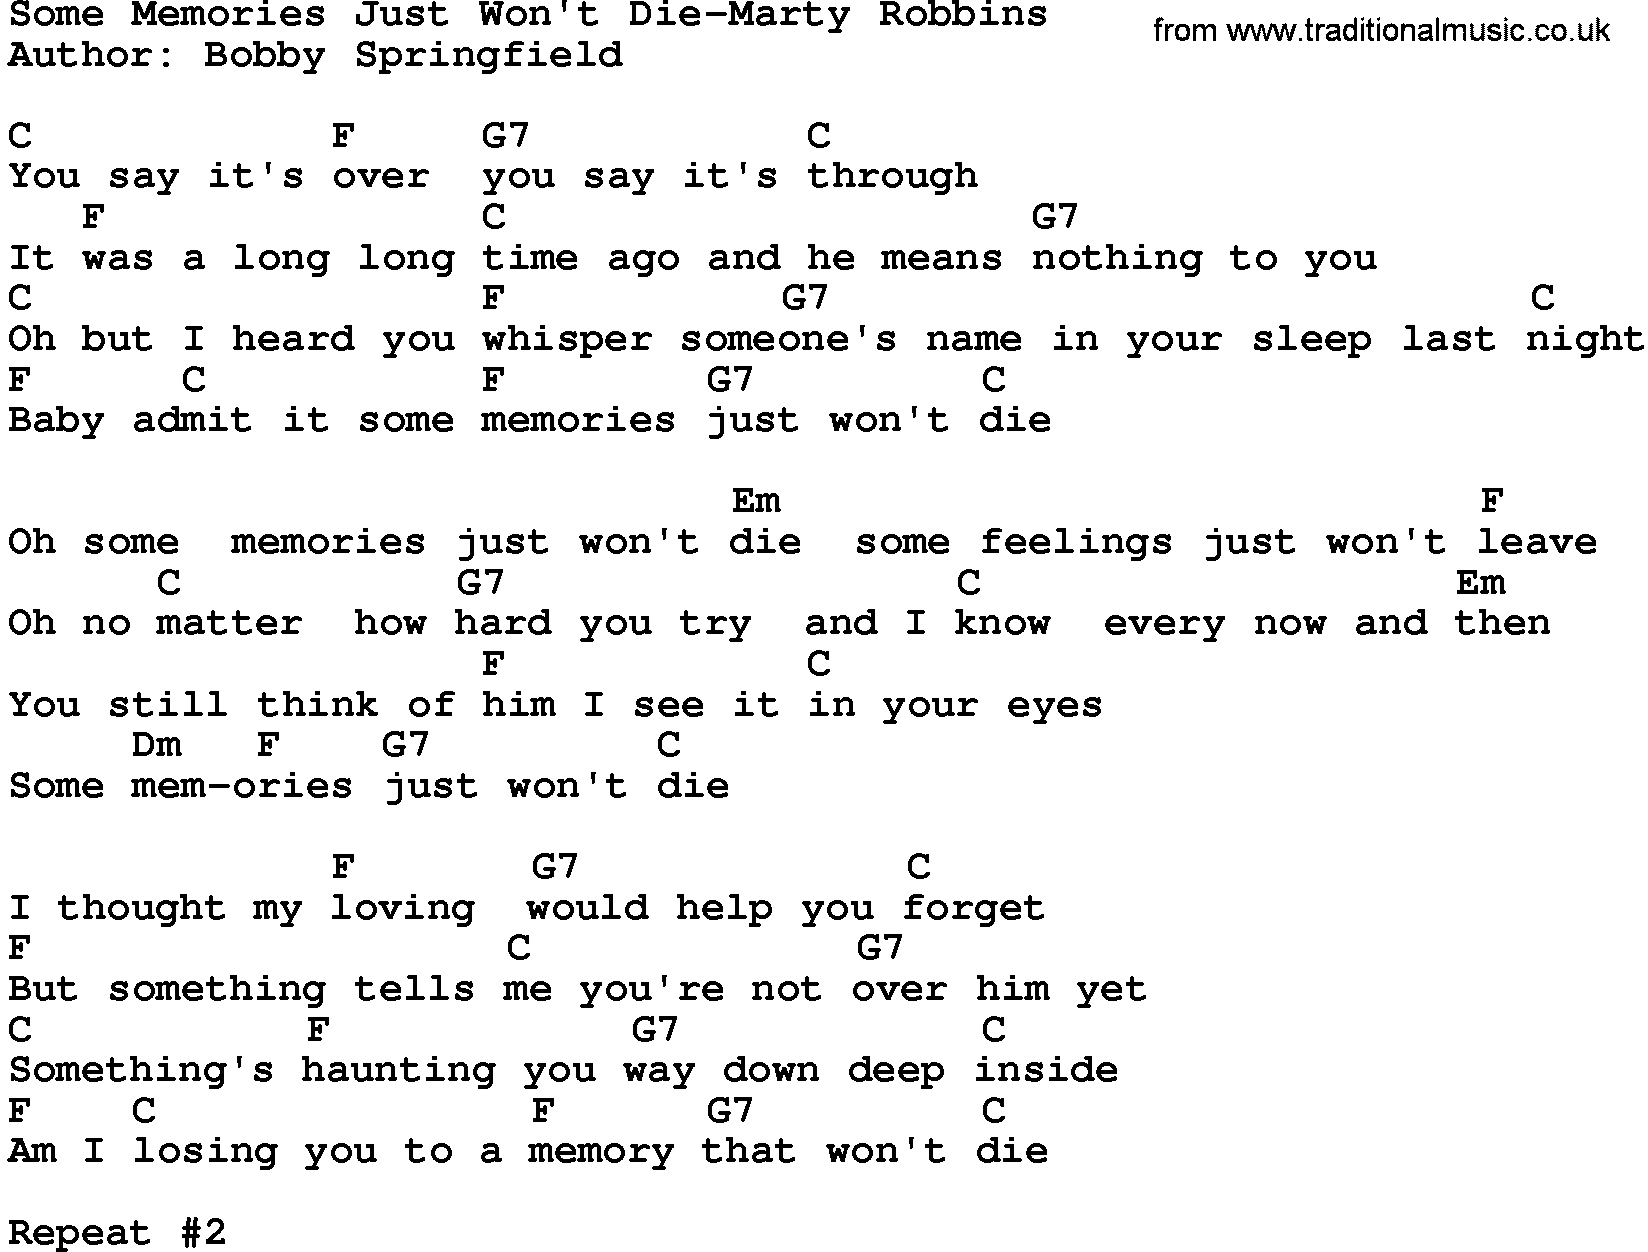 Country music song: Some Memories Just Won't Die-Marty Robbins lyrics and chords